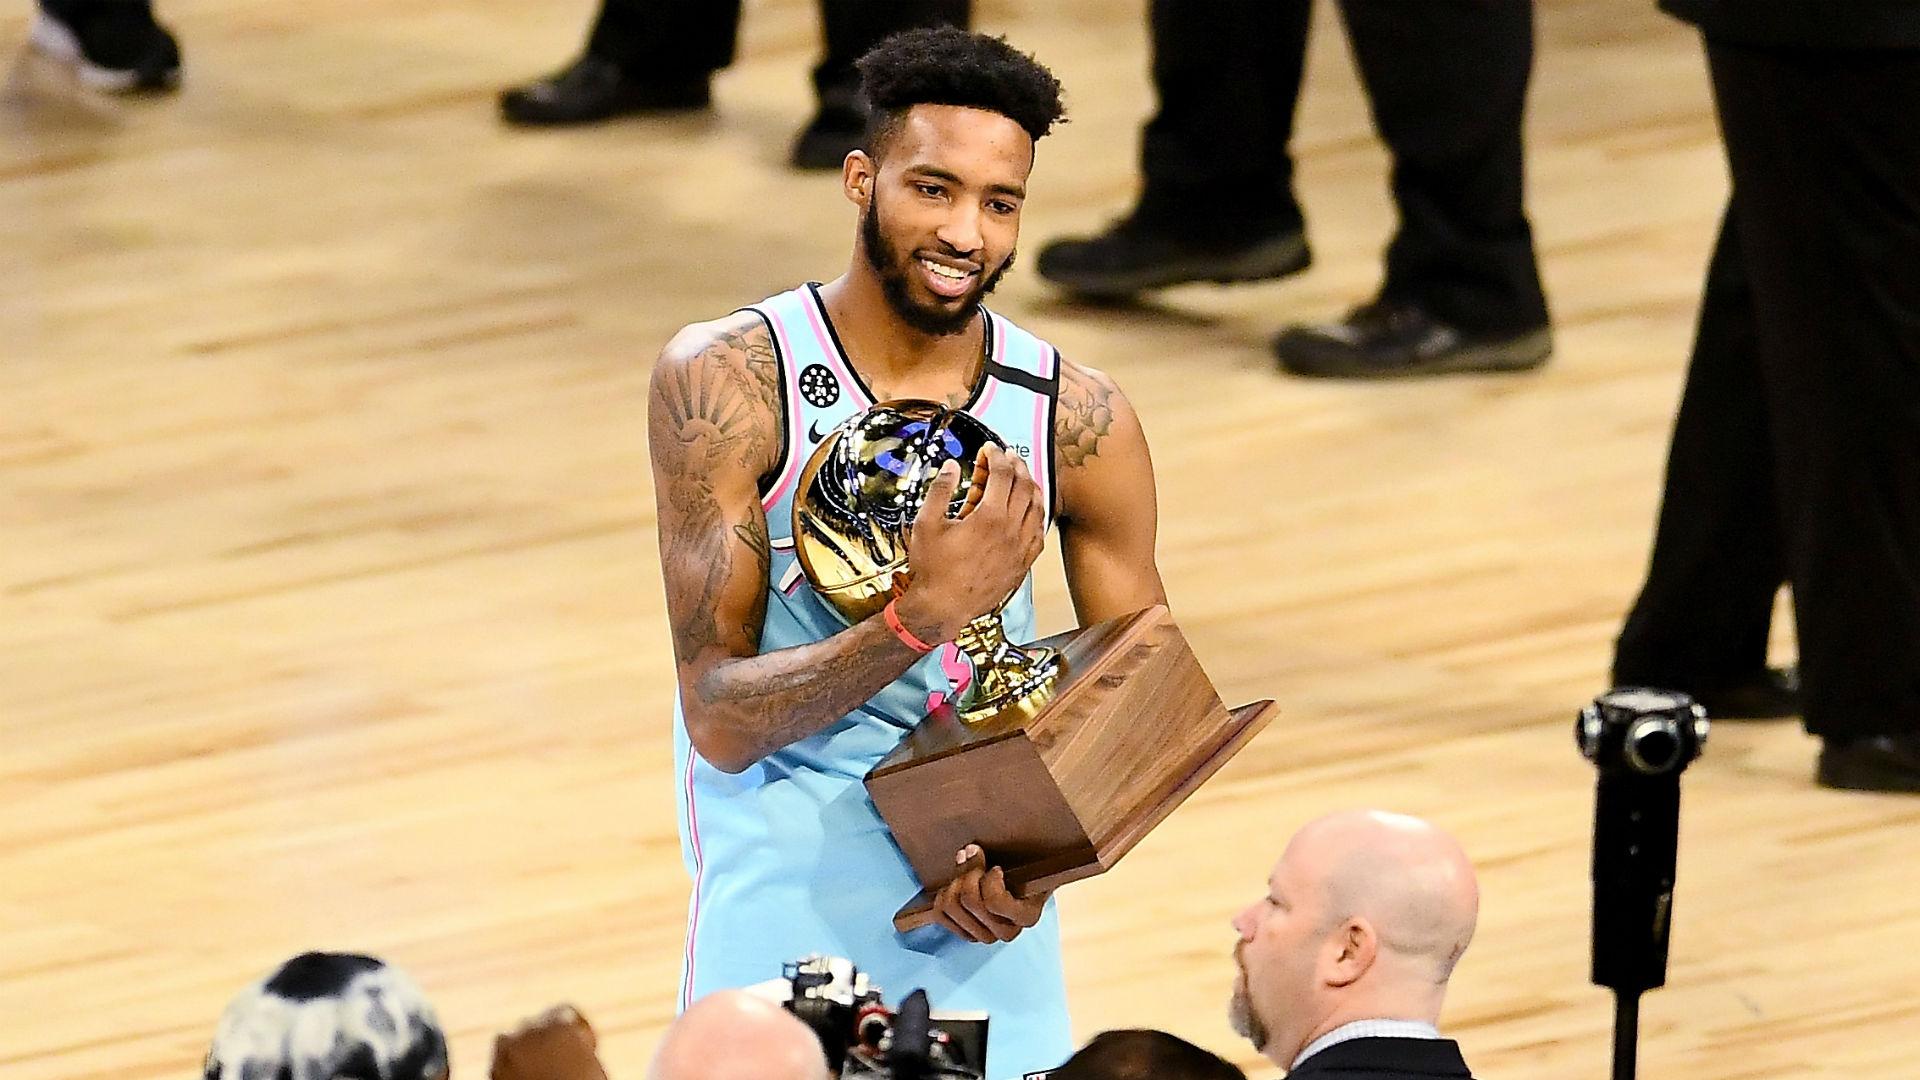 Who won the NBA Slam Dunk Contest in 2020? Full results